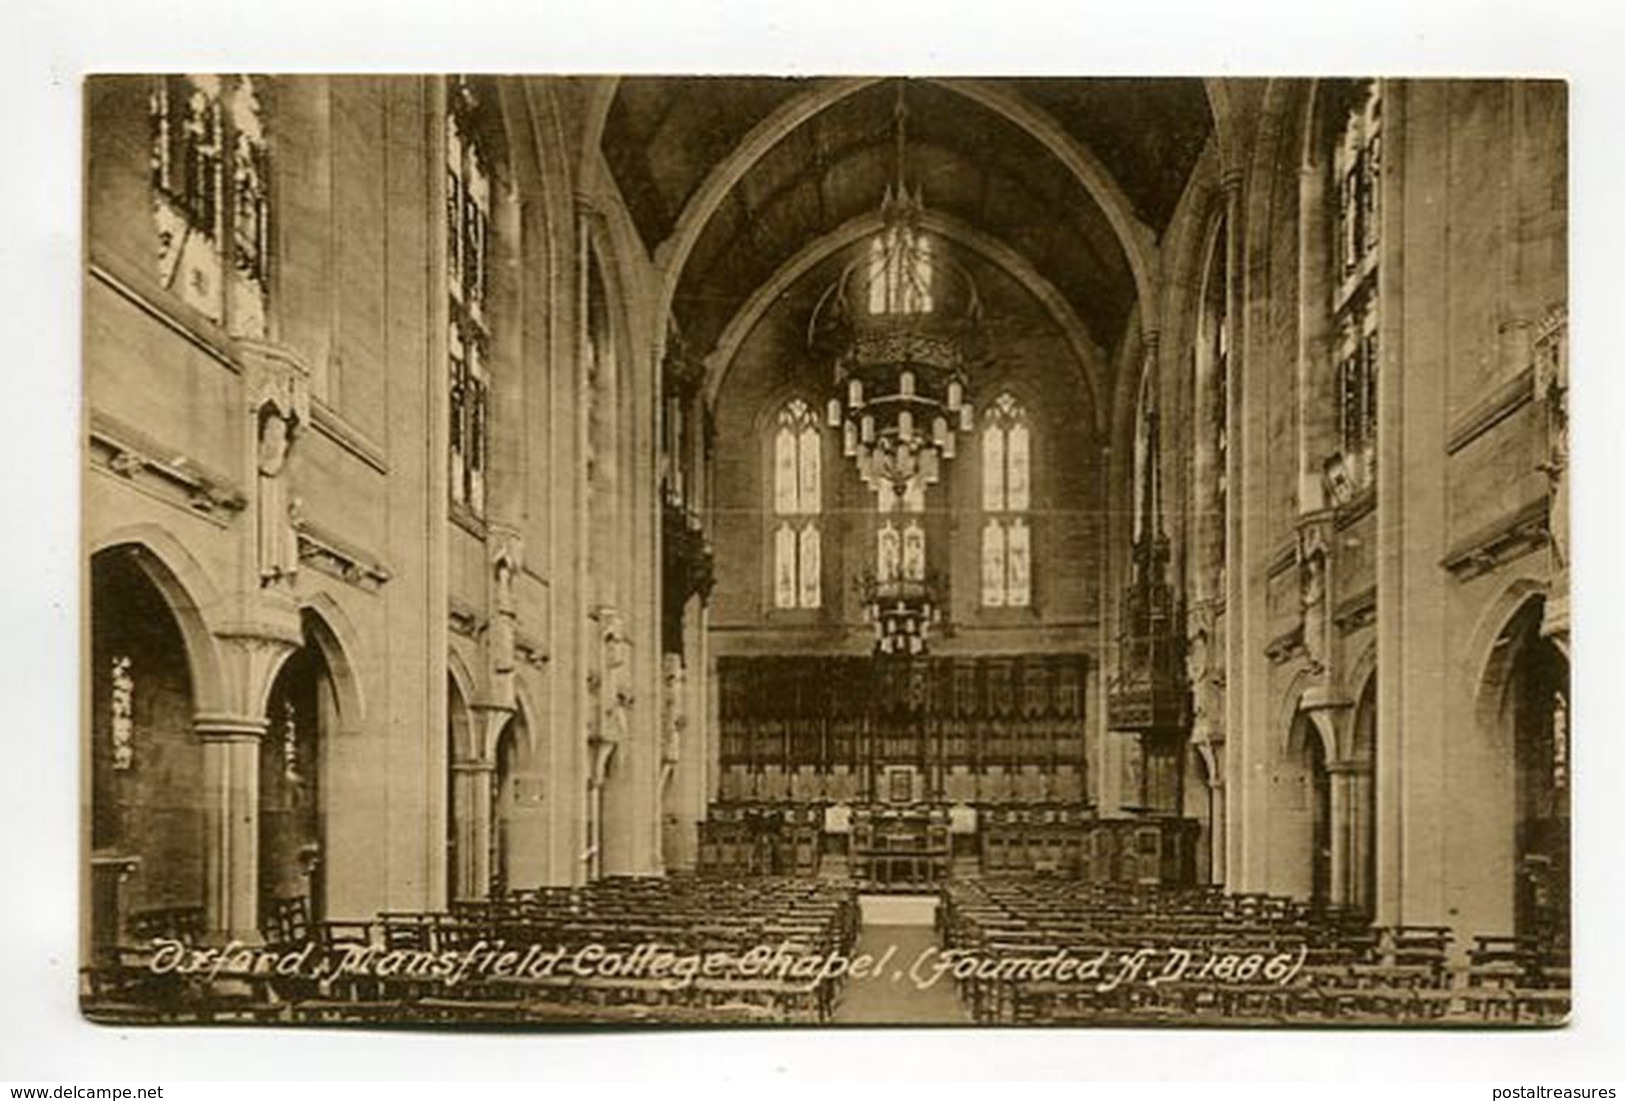 Oxford, Mansfield College, Chapel, (FoundedA.D. 1886). - Oxford